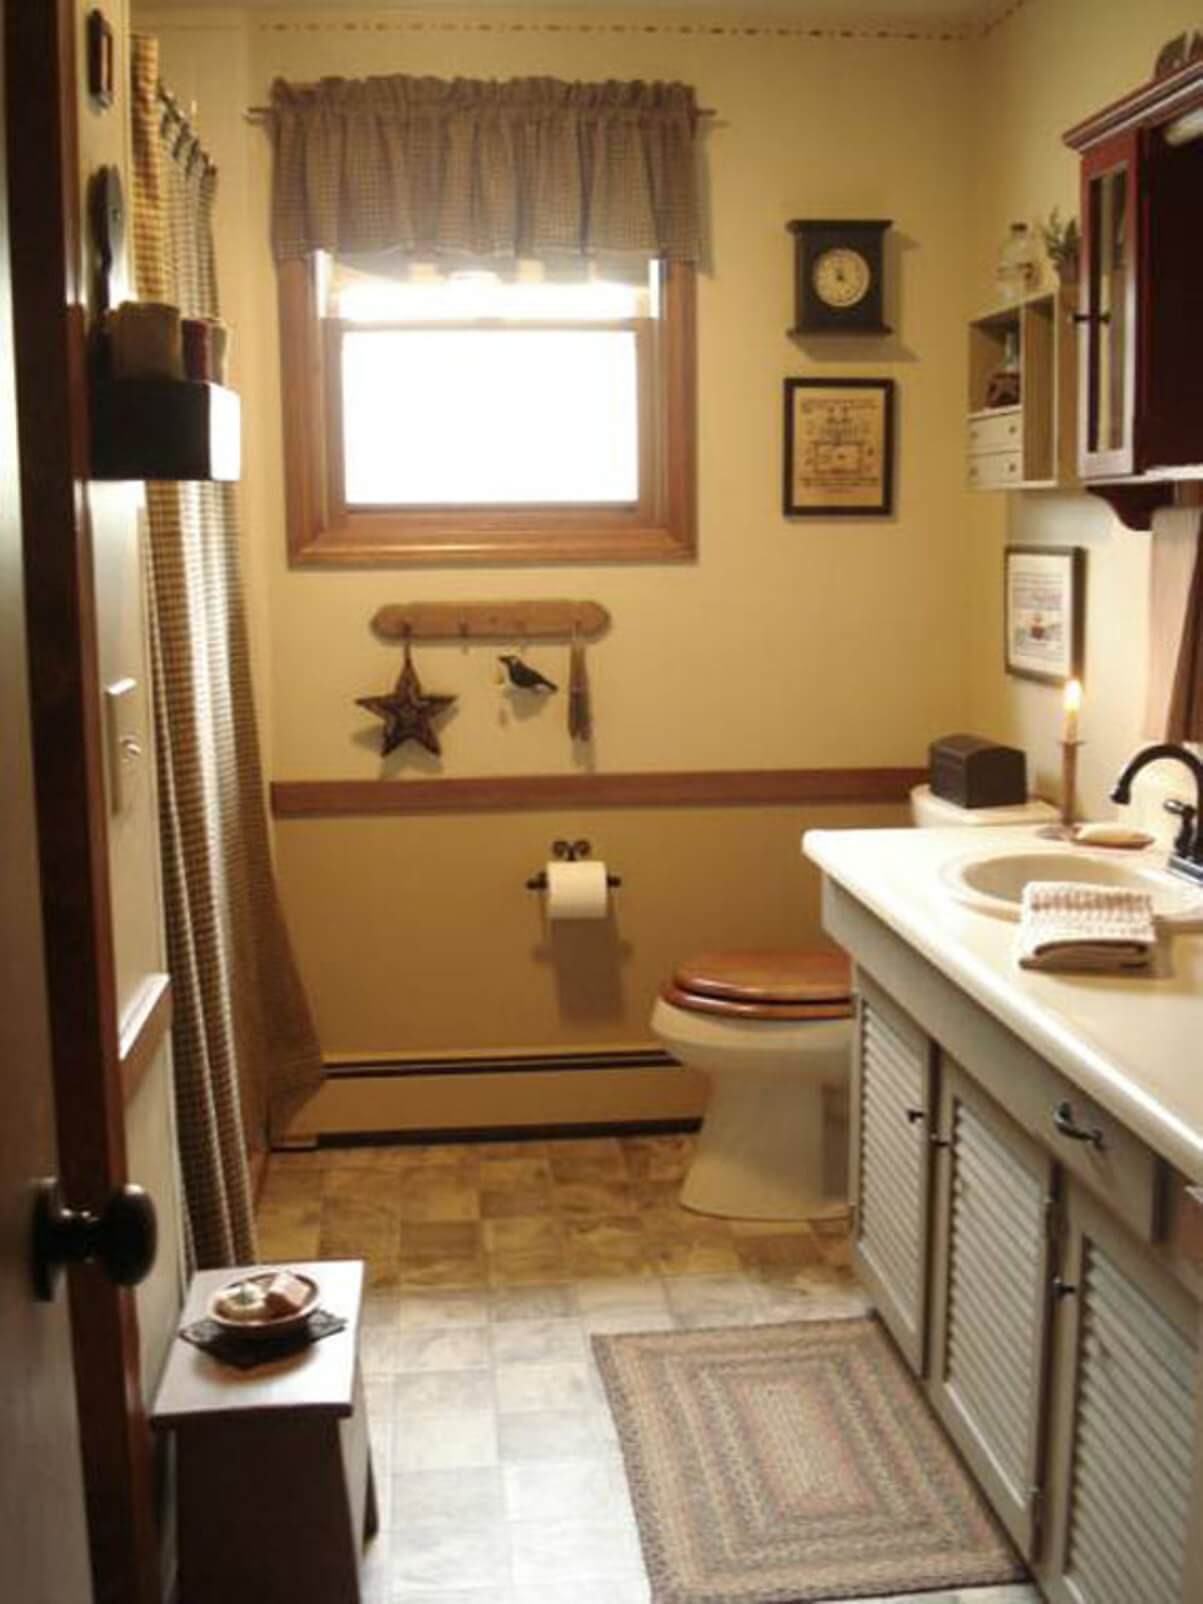 Country Bathroom Wall Decor
 Designs for Country Bathrooms Interior Decorating Colors